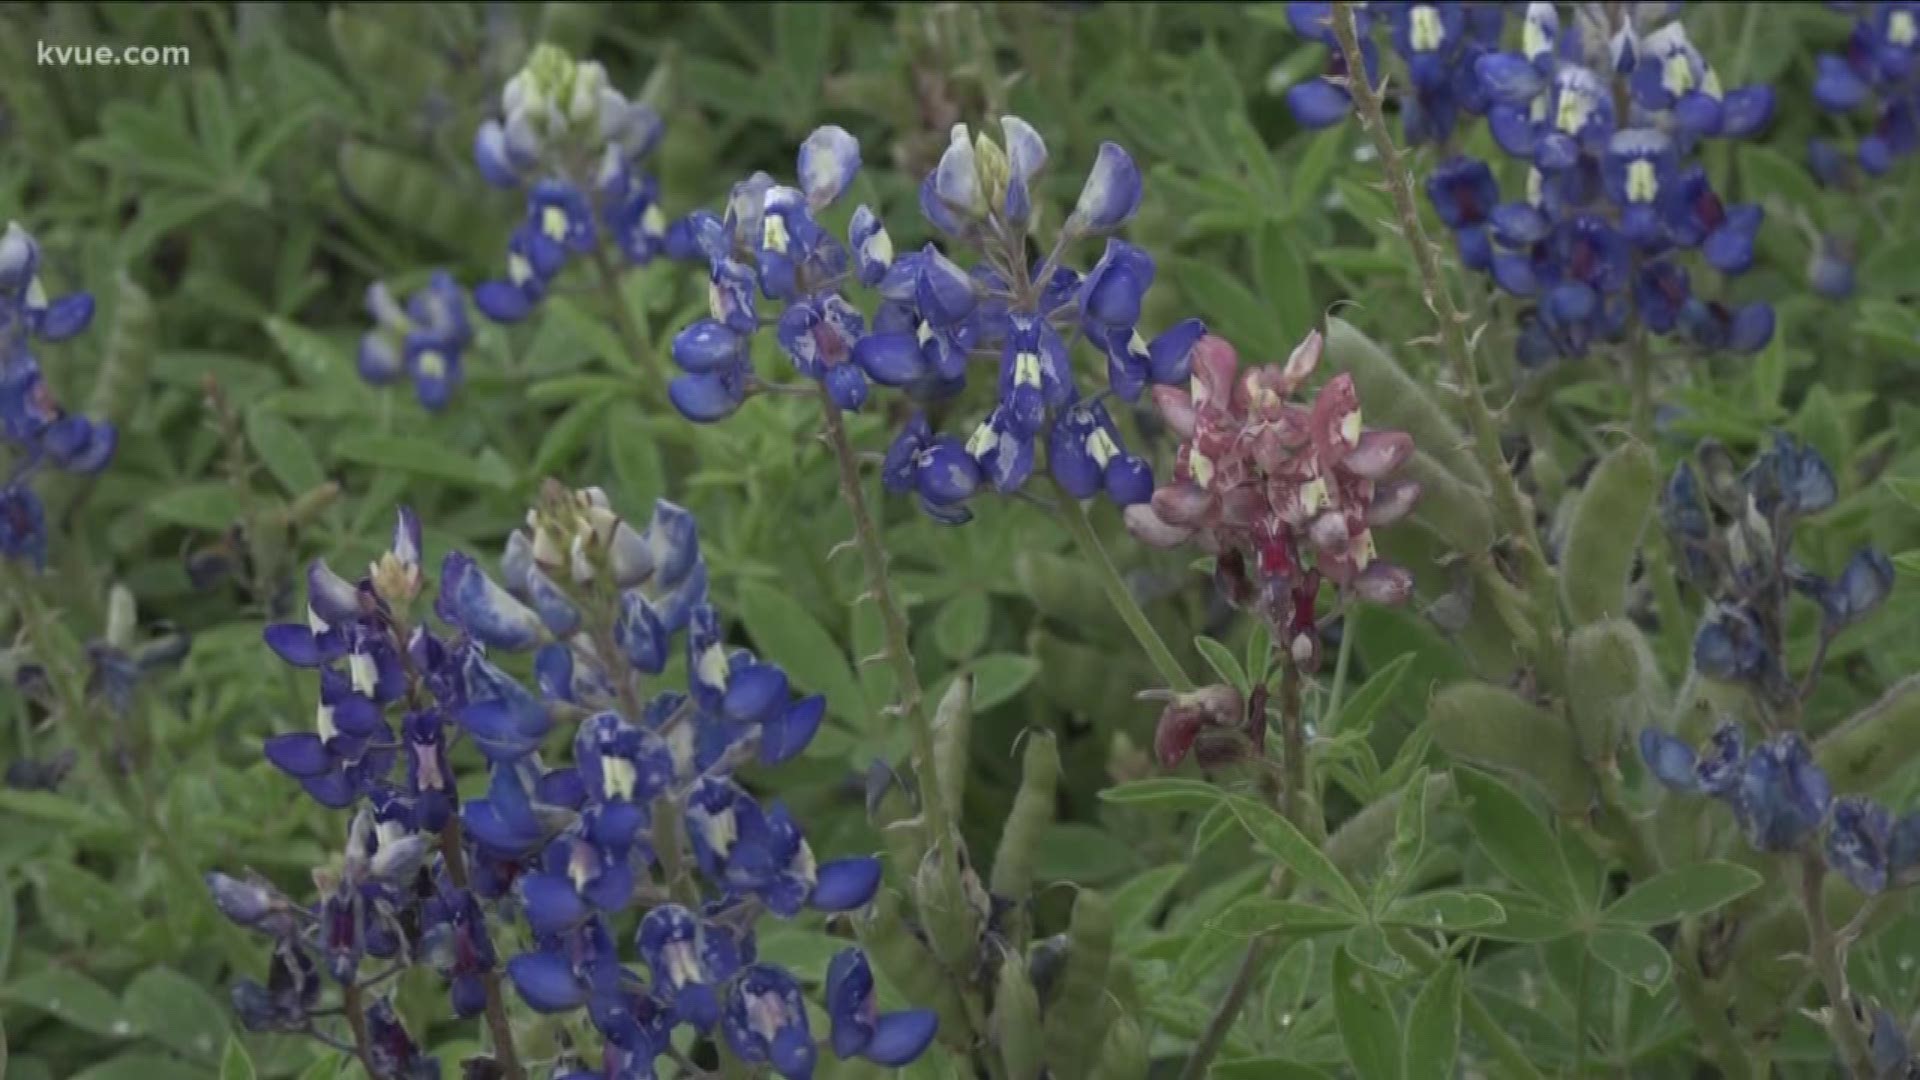 The bluebonnets are in full bloom in Texas – but as Rebeca Trejo explains, they aren't all blue.